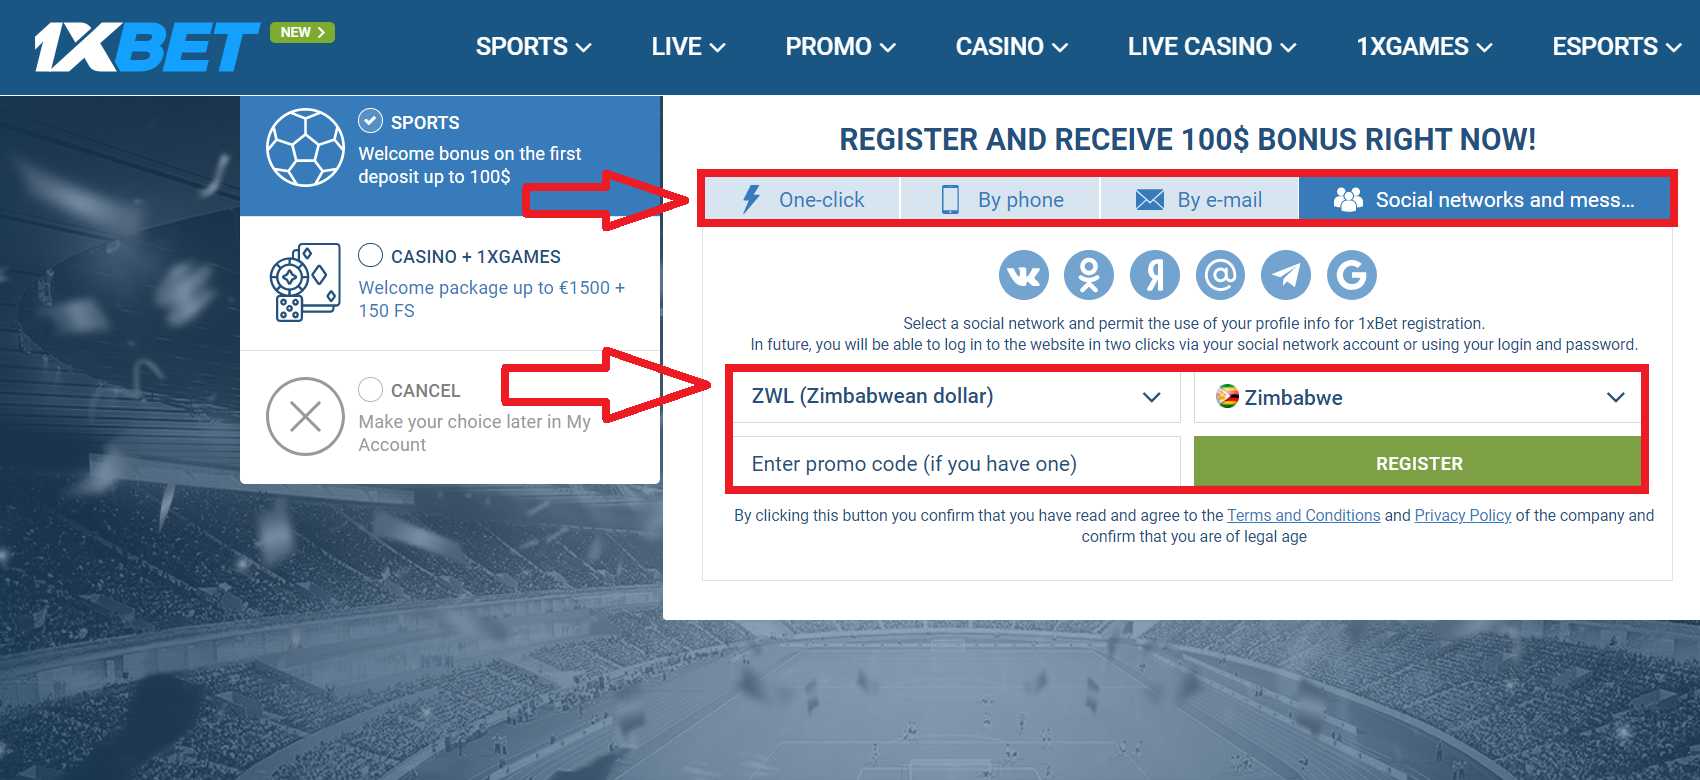 How to sign up ang get welcome rewards from 1xBet company